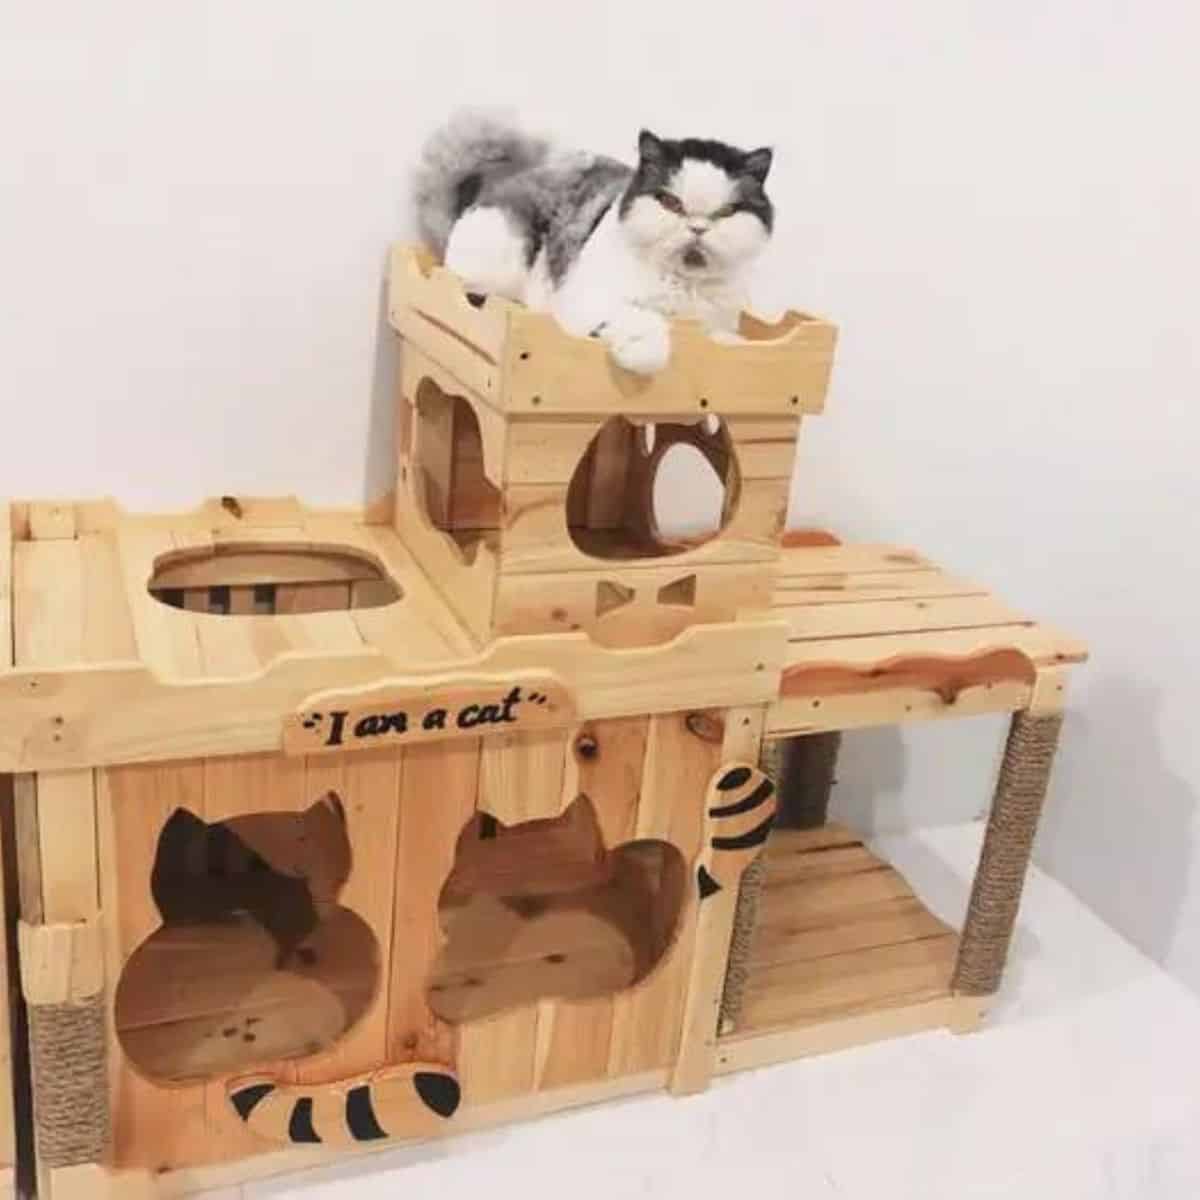 an angry cat is sitting on a toy box